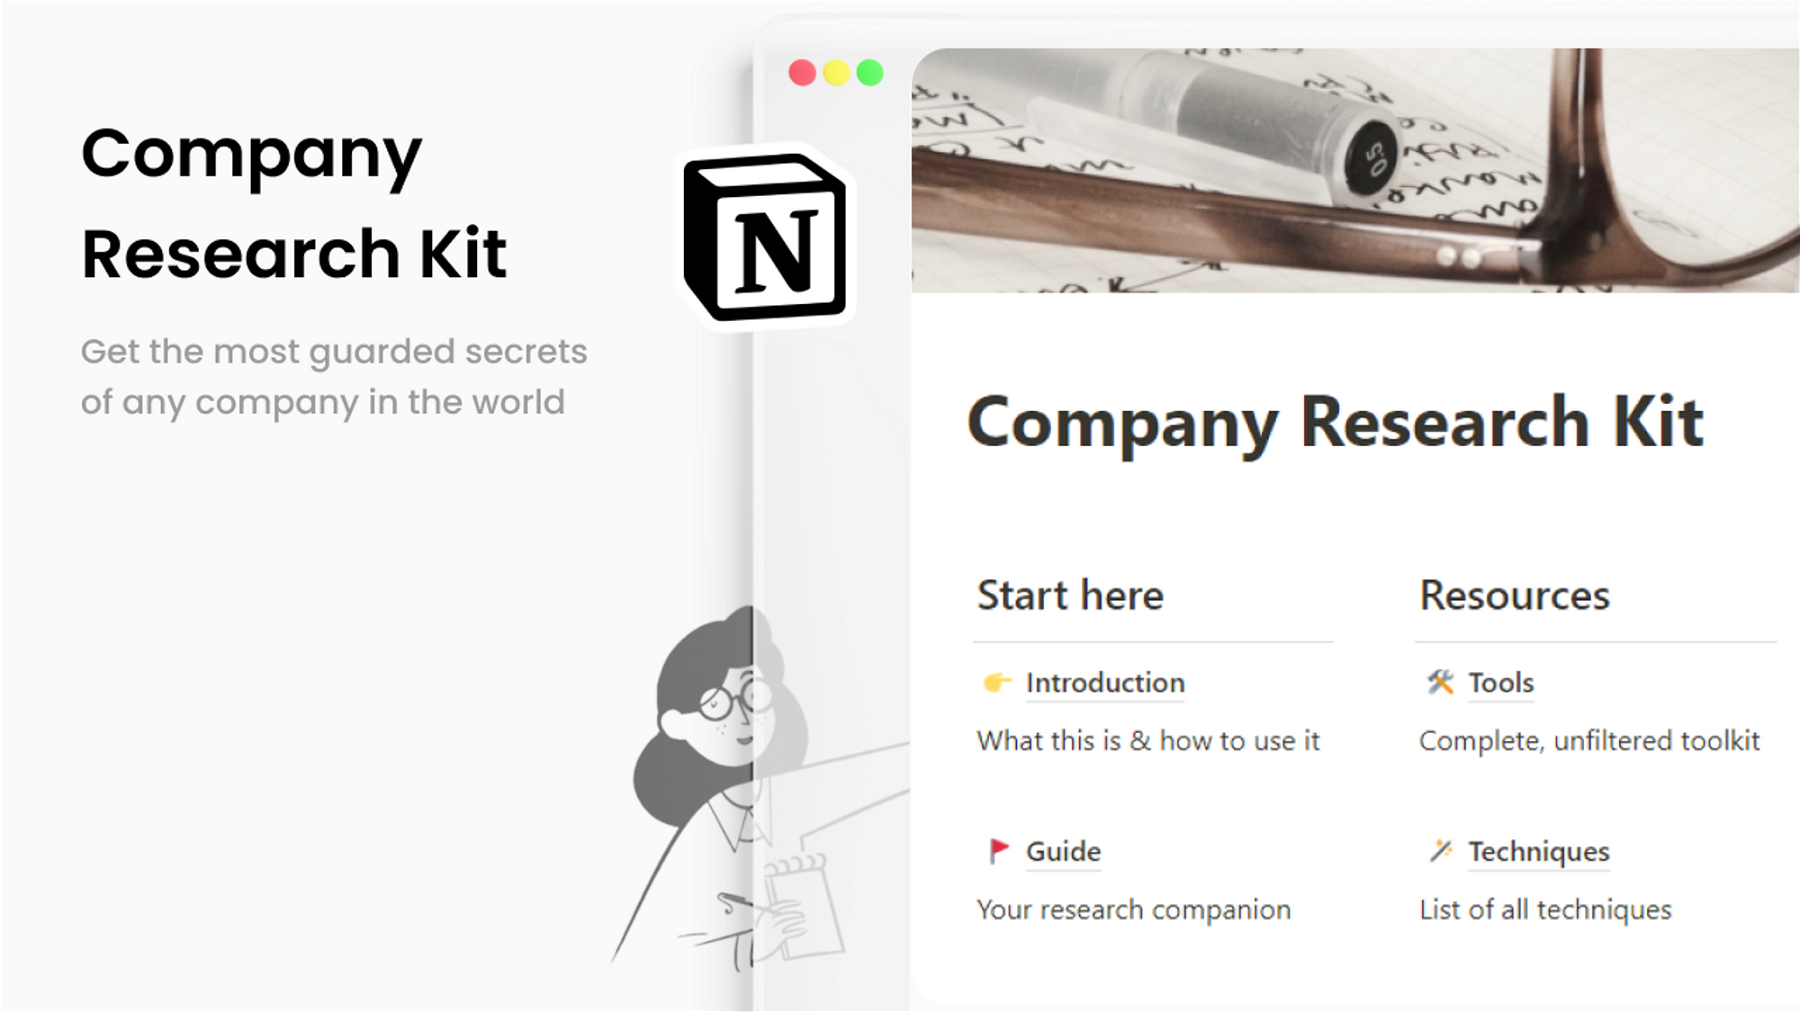 Company Research Kit